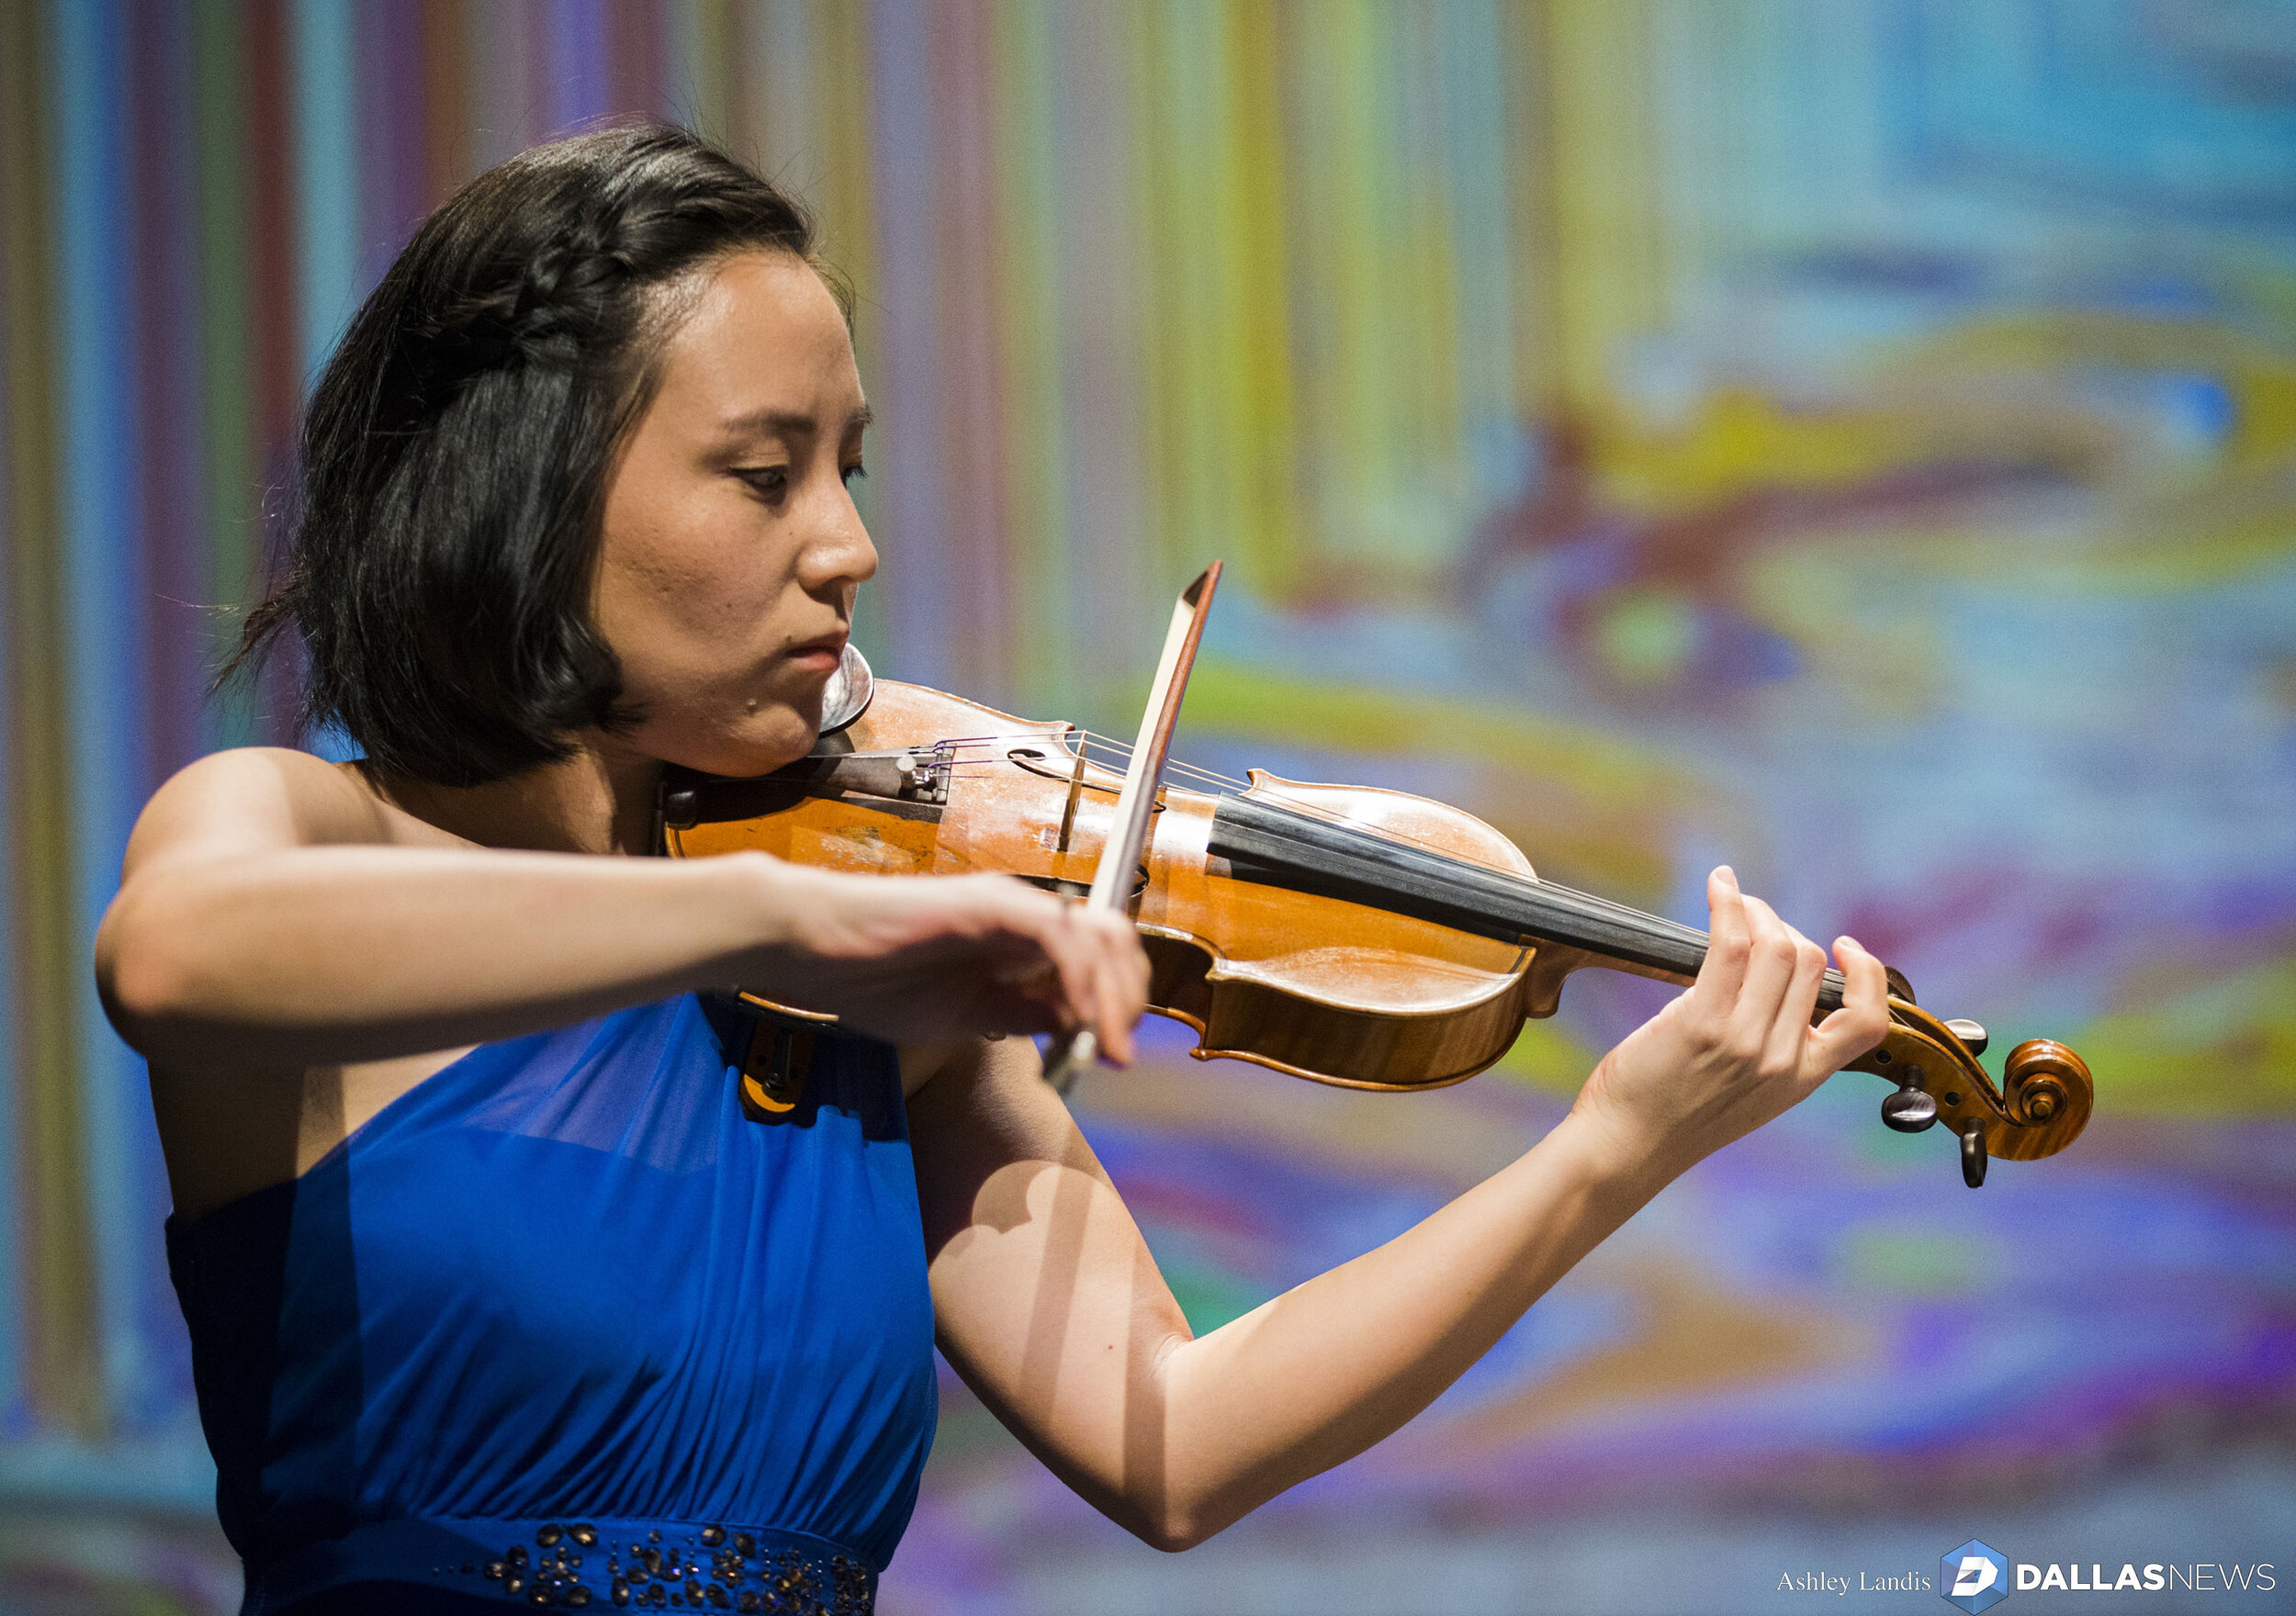  Violinist Grace Kang Wollett rehearses under a photo of "Horizons," artwork by Ian Davenport, before a Basically Beethoven Festival concert on Sunday, July 7, 2019 at Moody Performance Hall in Dallas. Composer Kimberly Osberg was inspired by the art